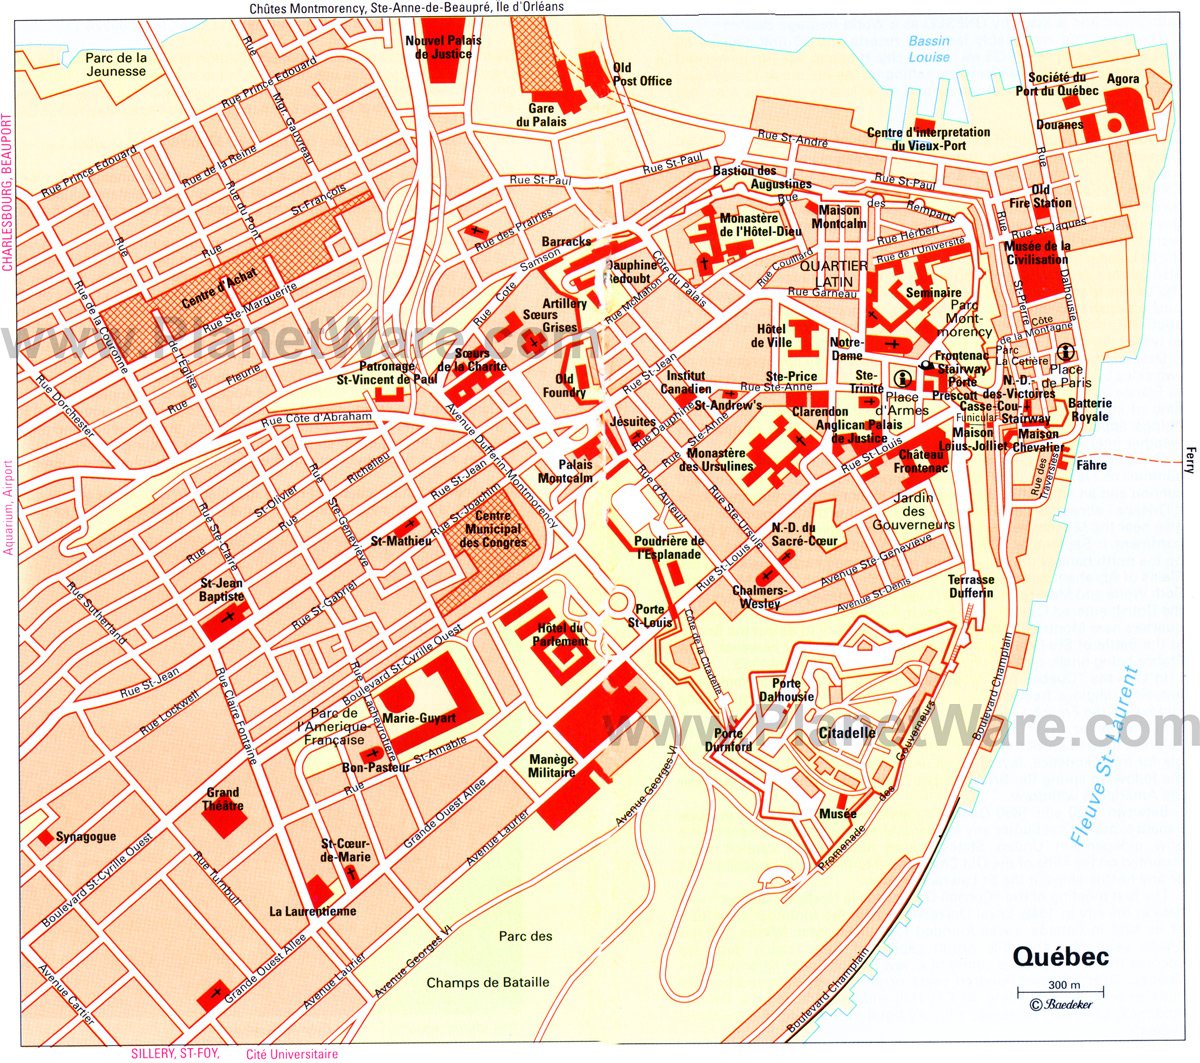 Quebec City Map - Tourist Attractions